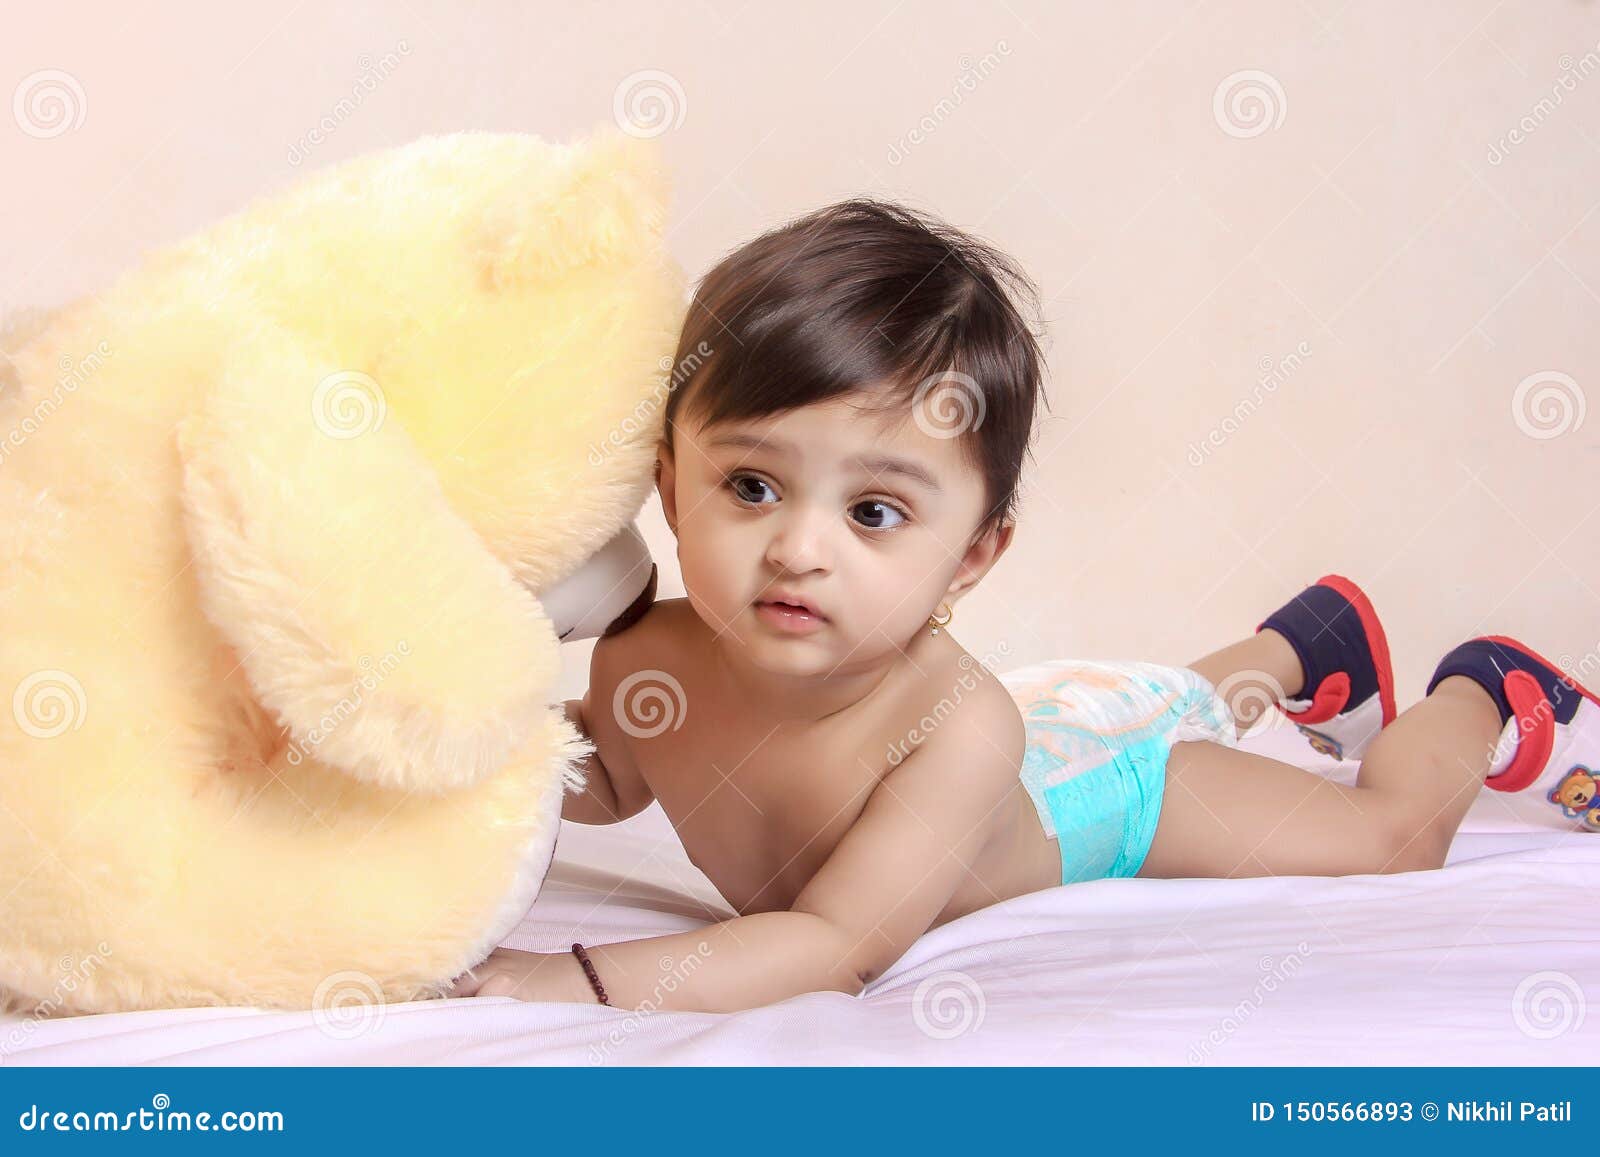 Cute Indian Baby Child Playing with Toy Stock Image - Image of adorable,  cute: 150566893